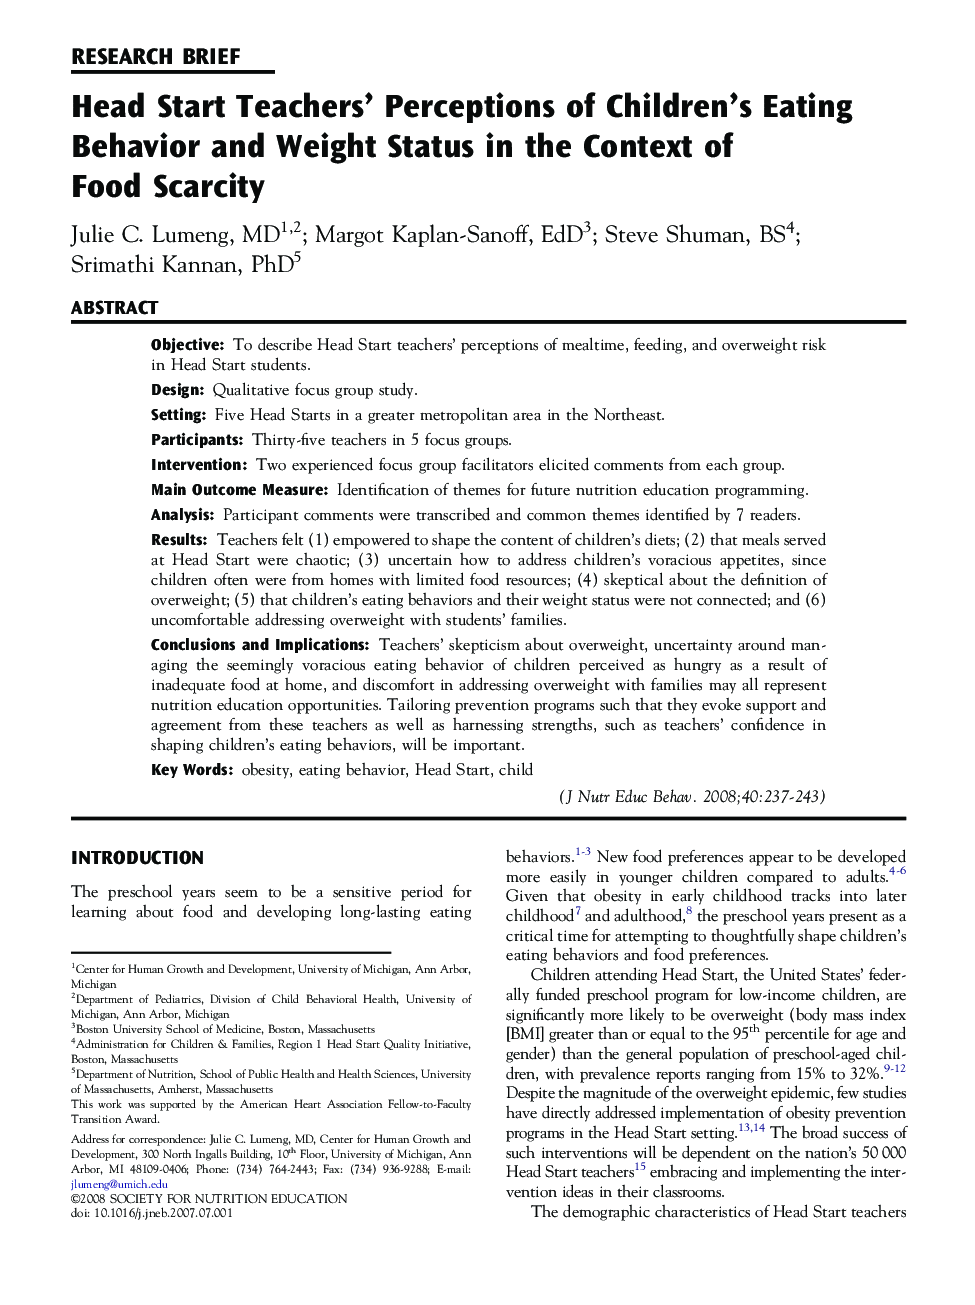 Head Start Teachers' Perceptions of Children's Eating Behavior and Weight Status in the Context of Food Scarcity 